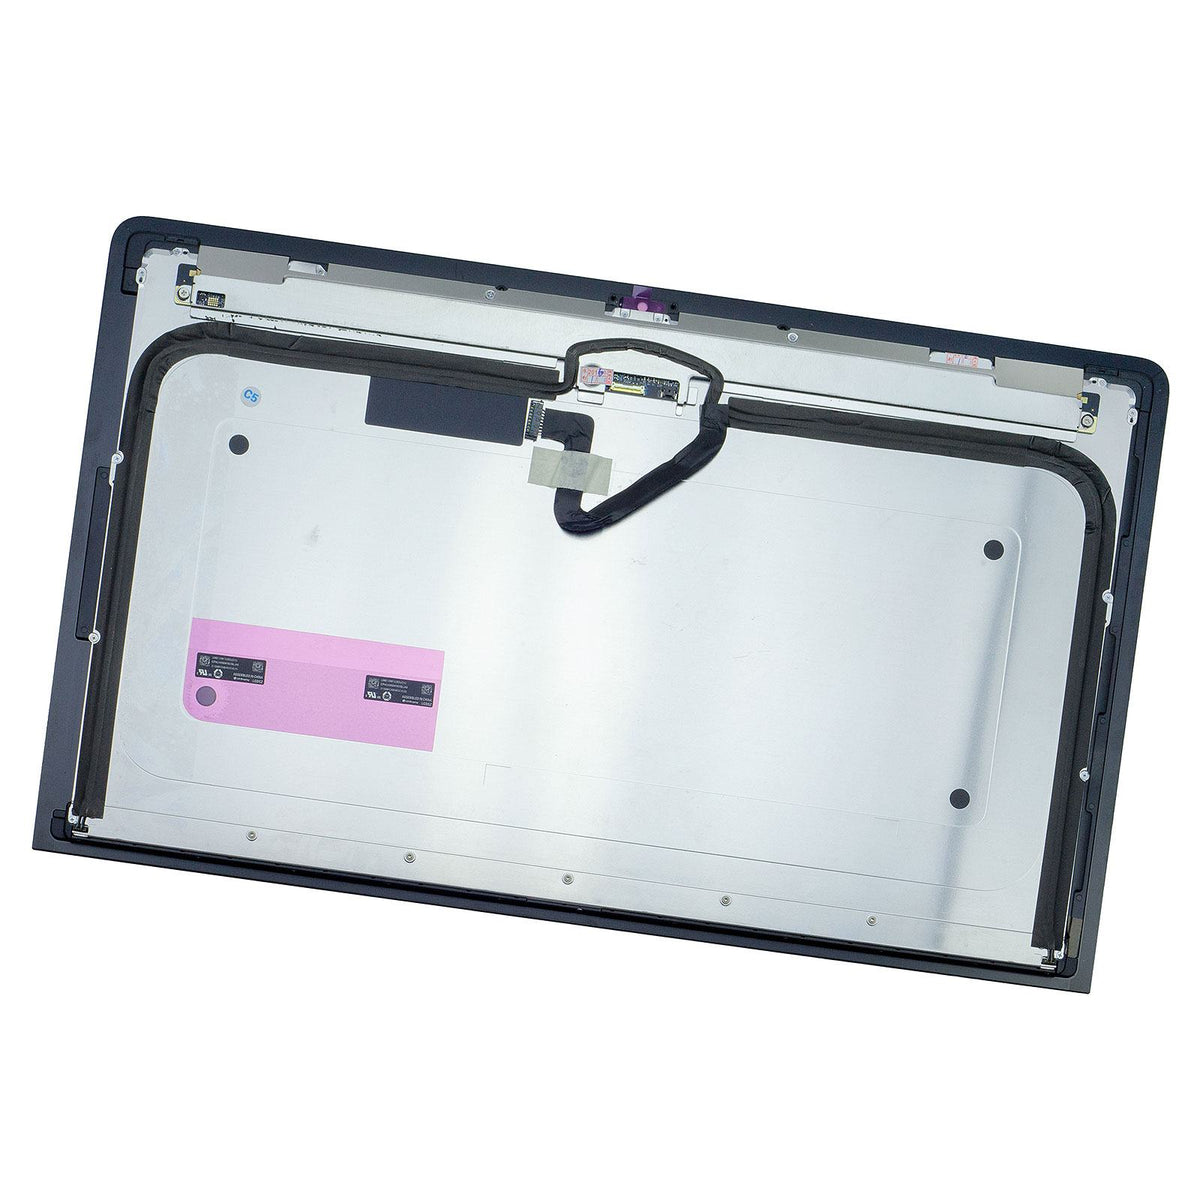 LCD DISPLAY PANEL + GLASS COVER FOR IMAC 21.5" A1418 (LATE 2012, LATE 2015)